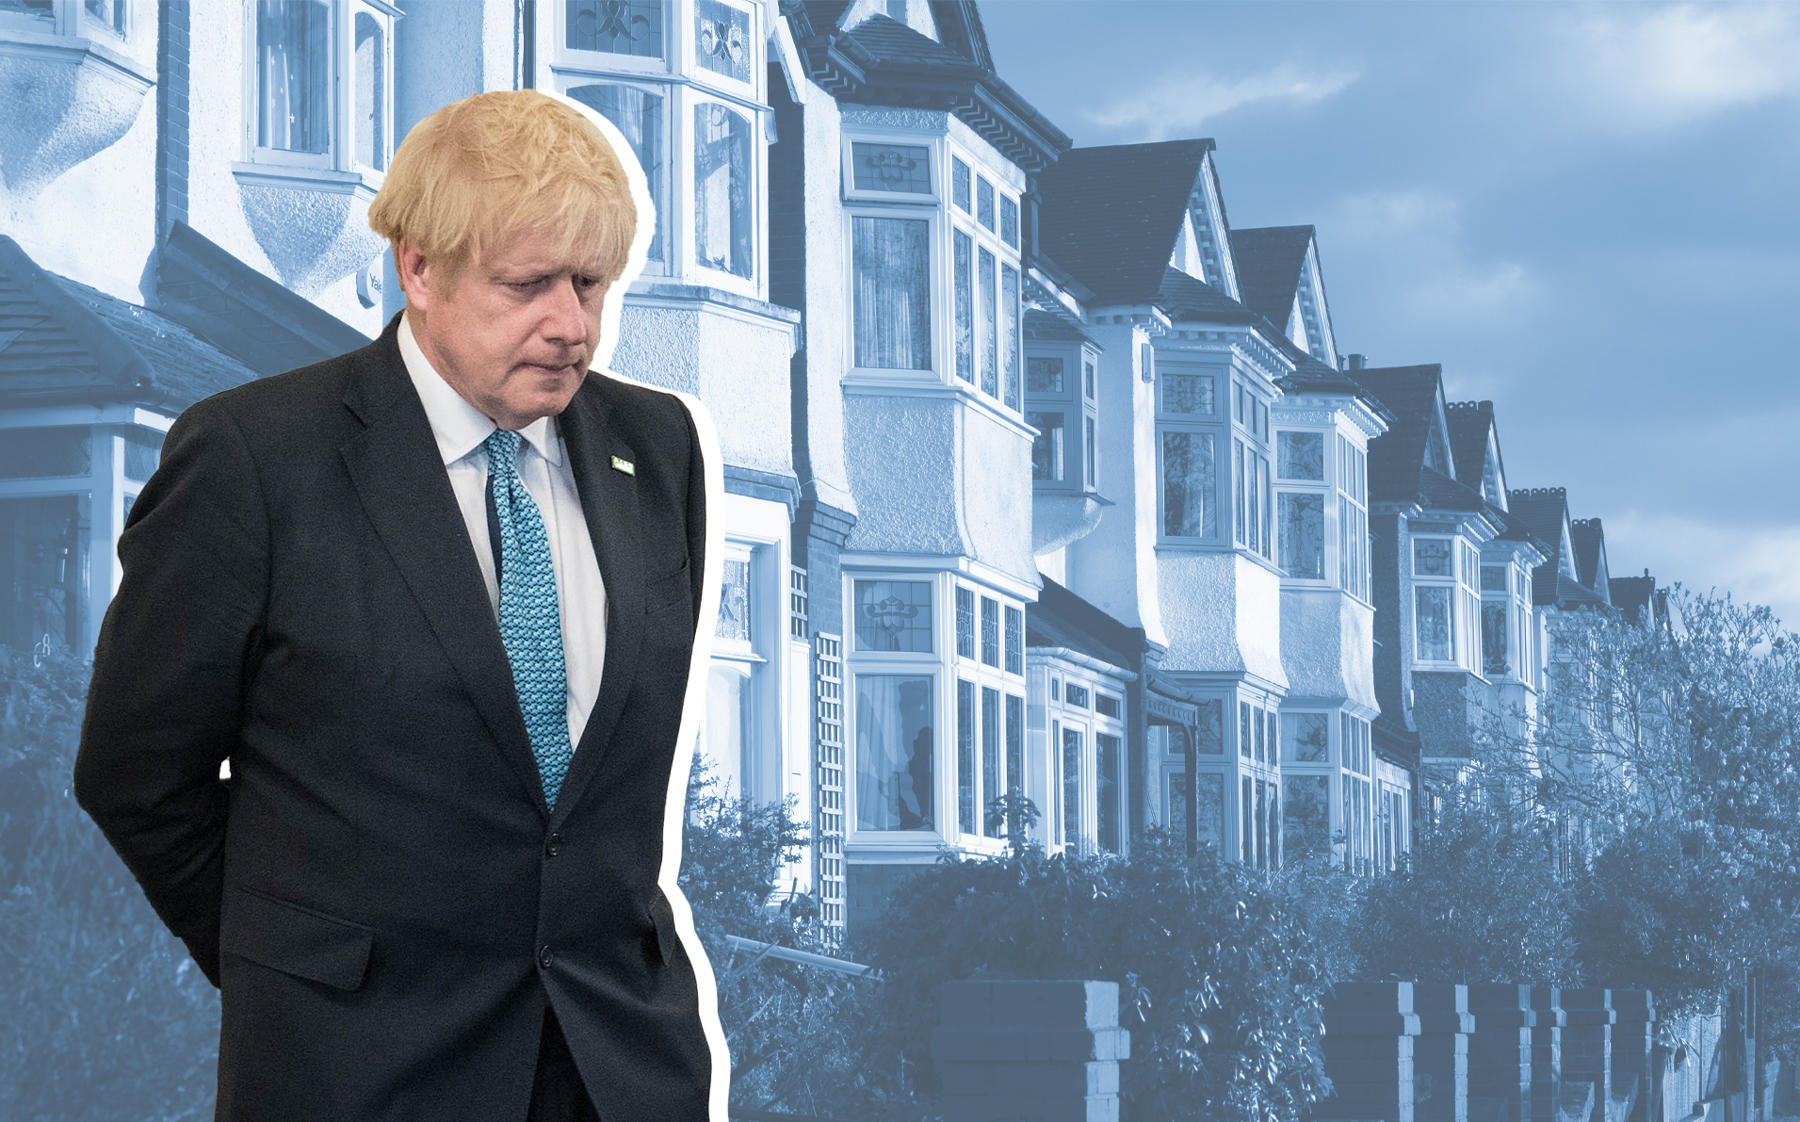 The coronavirus pandemic put $102B worth of U.K. home sales – and $1B in broker fees – on ice. Buyers are returning to the market and sellers never really left, possibly setting up the market for a quick recovery. (Prime Minister Boris Johnson by STEFAN ROUSSEAU/POOL/AFP via Getty Images)